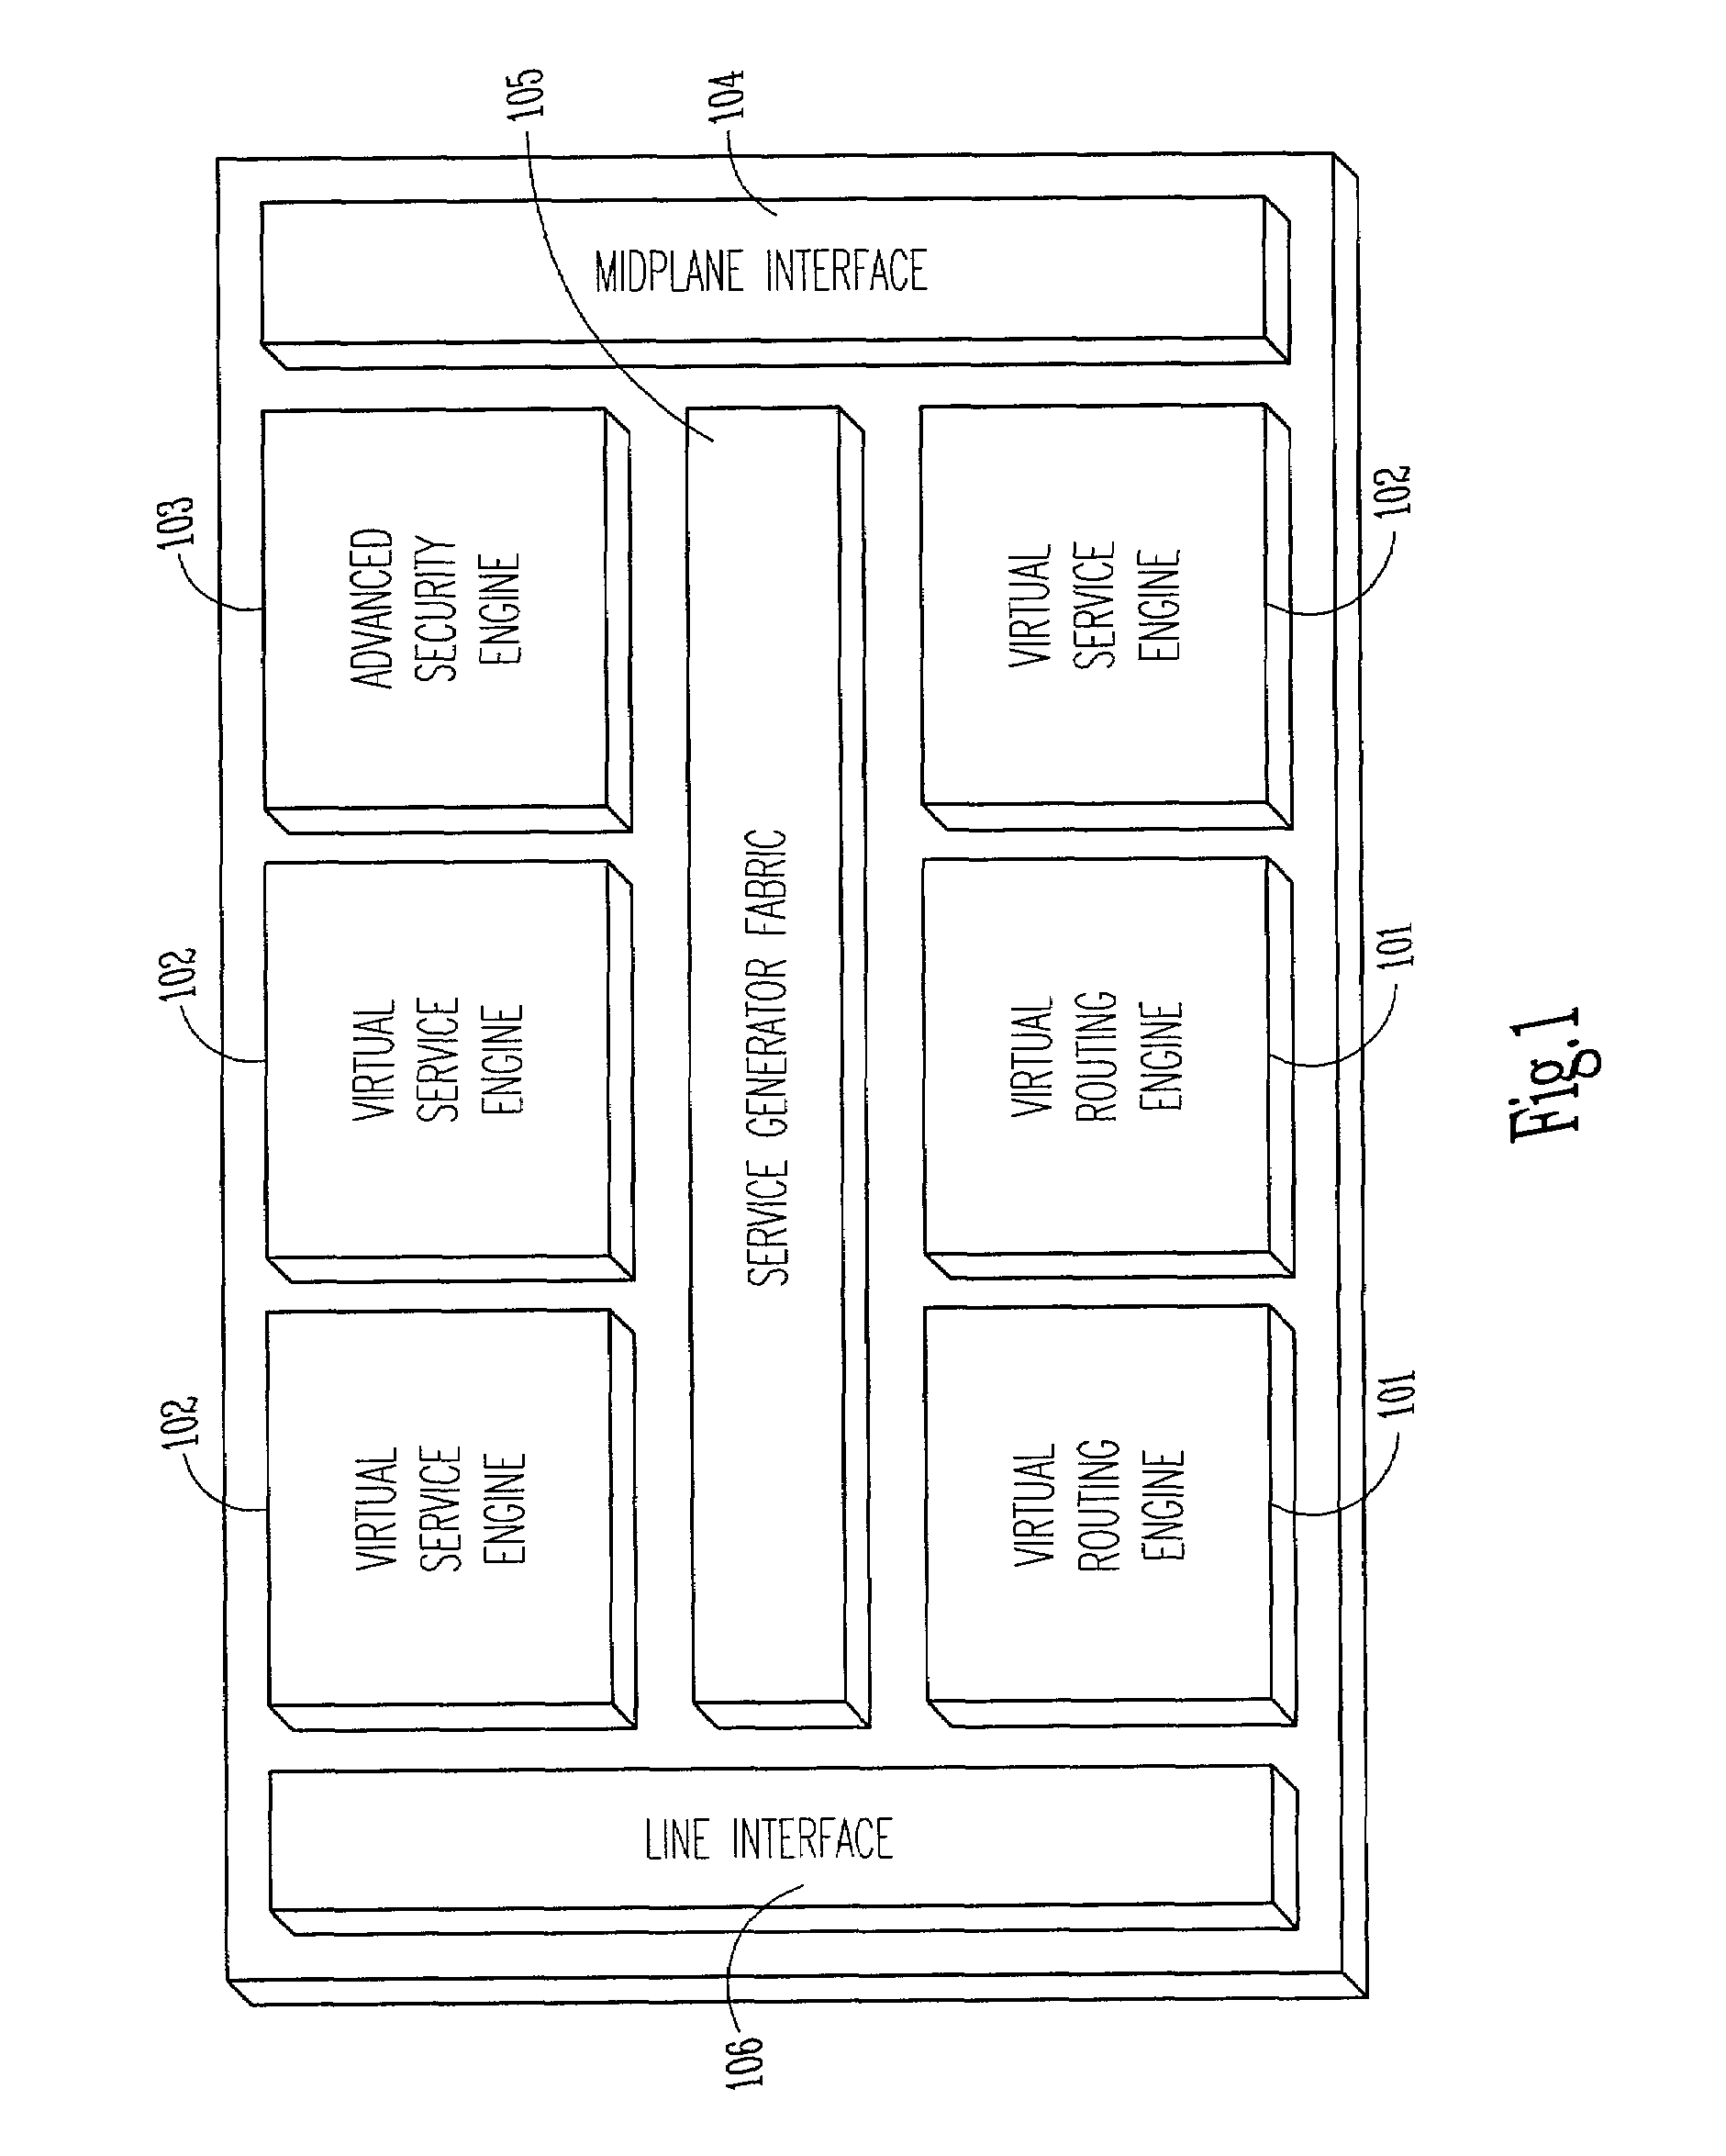 System and method for controlling routing in a virtual router system